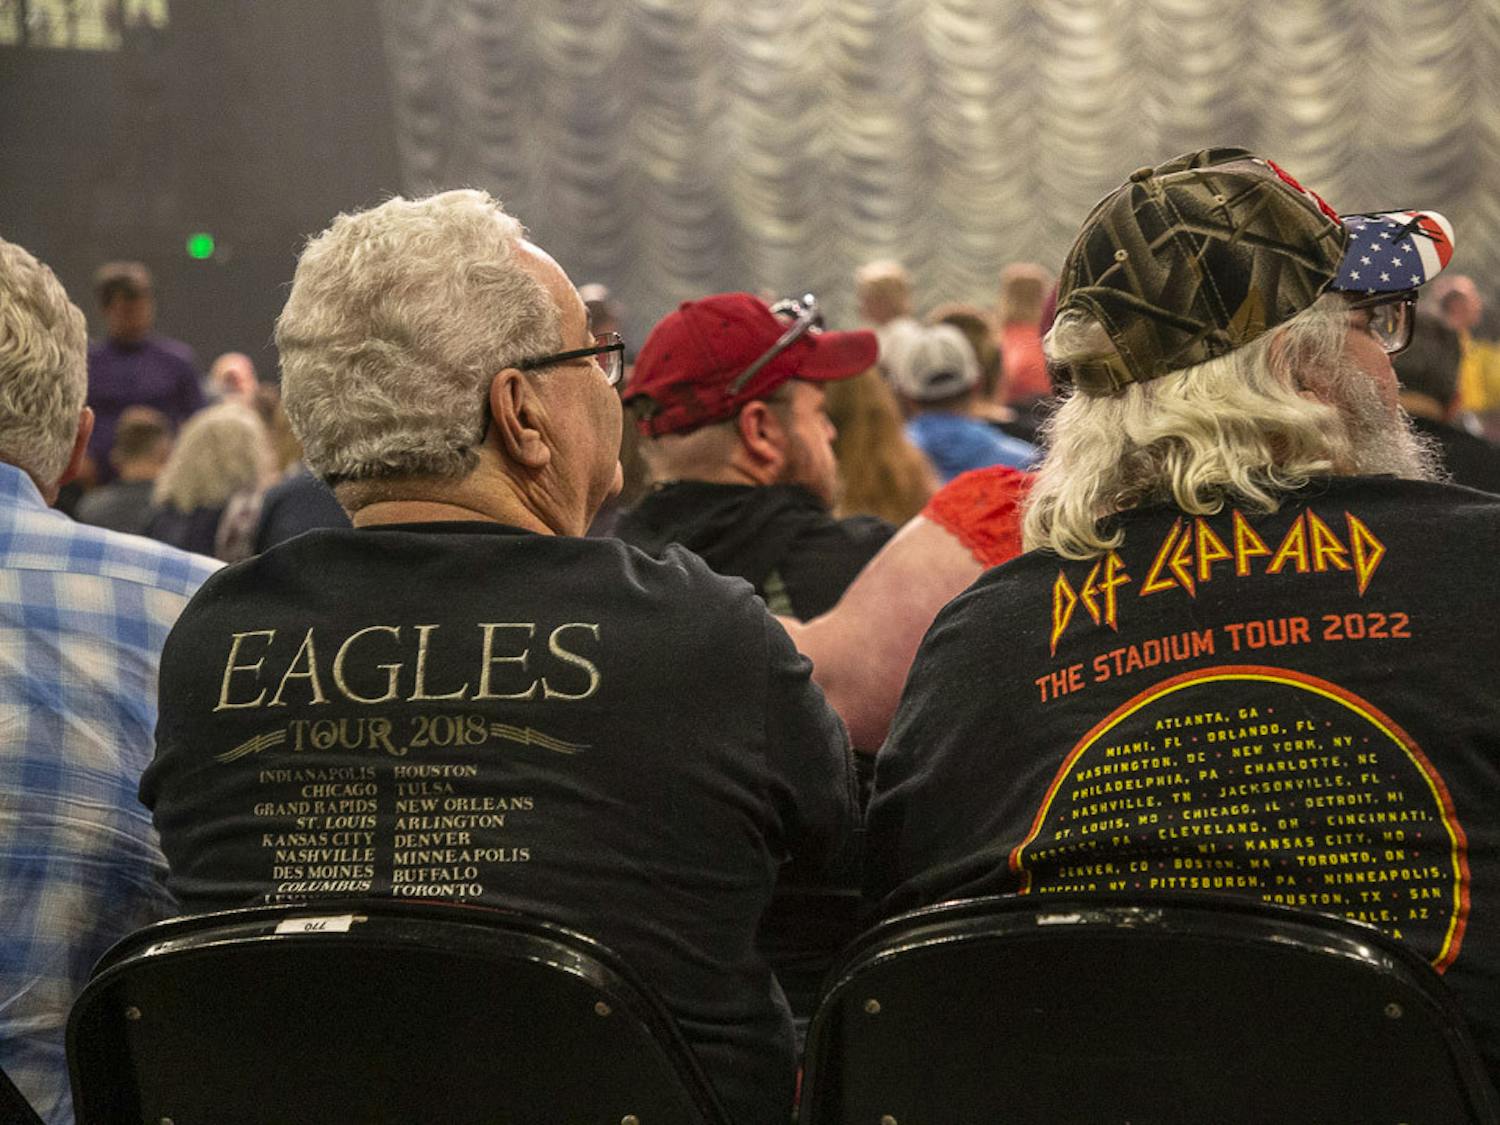 A couple with Eagles and Def Leppard band tees sit among the many fans in attendance for the Eagles concert at Colonial Life Arena on March 30, 2023. Fans of all ages attended the event, and the band performed songs from its "Hotel California" album as well as some of its greatest hits.